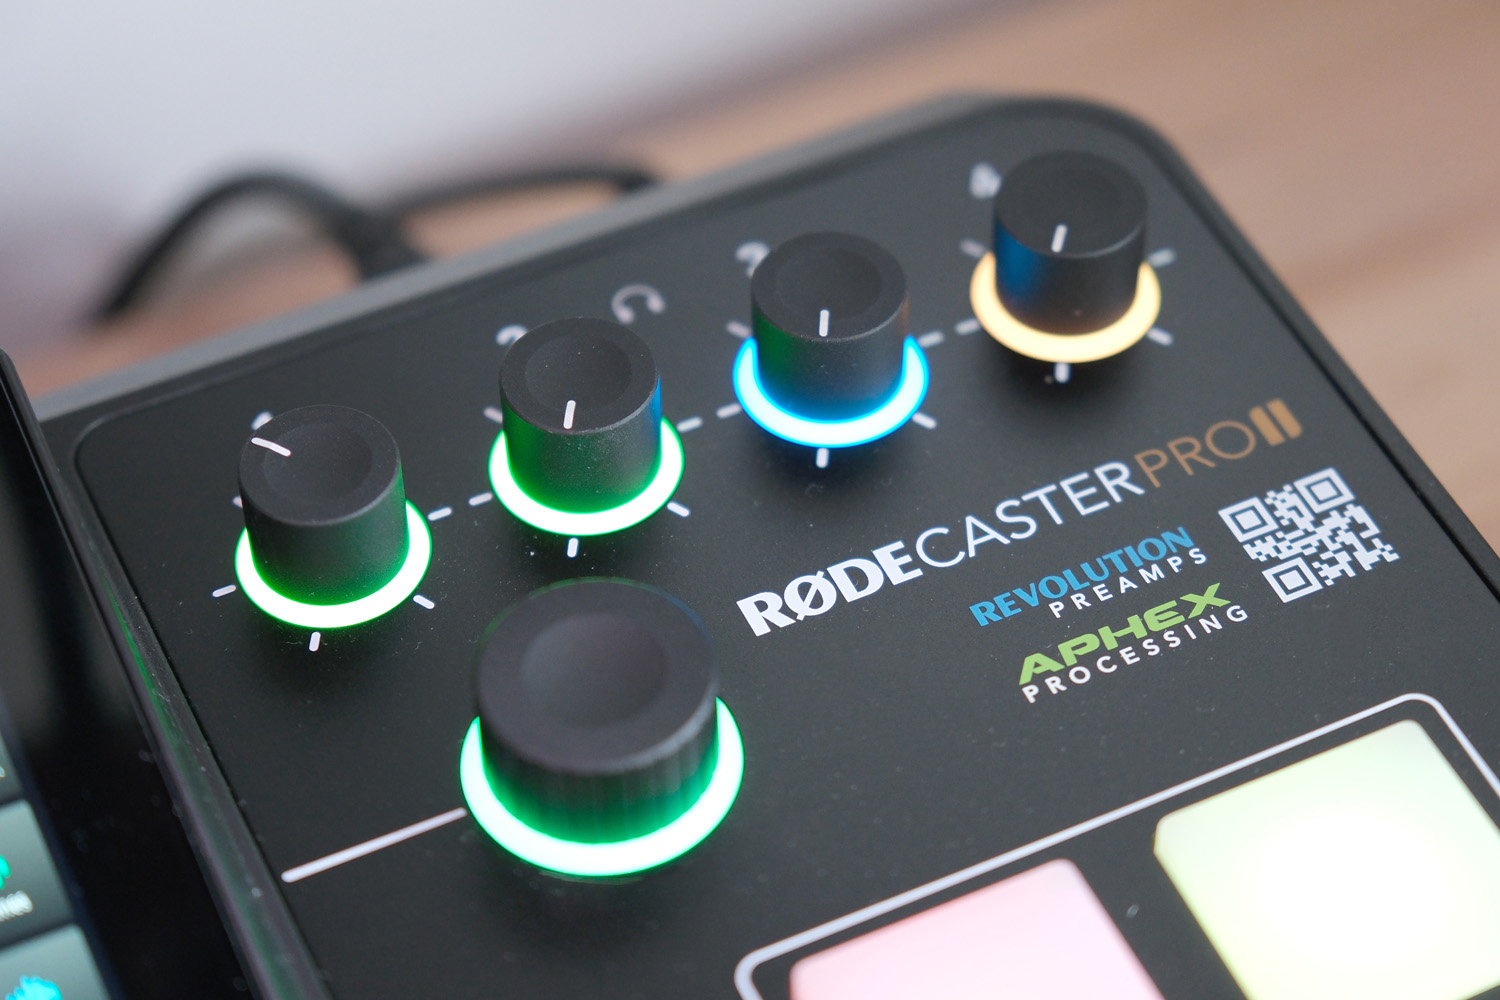 Rode Rodecaster Pro II monitor levels